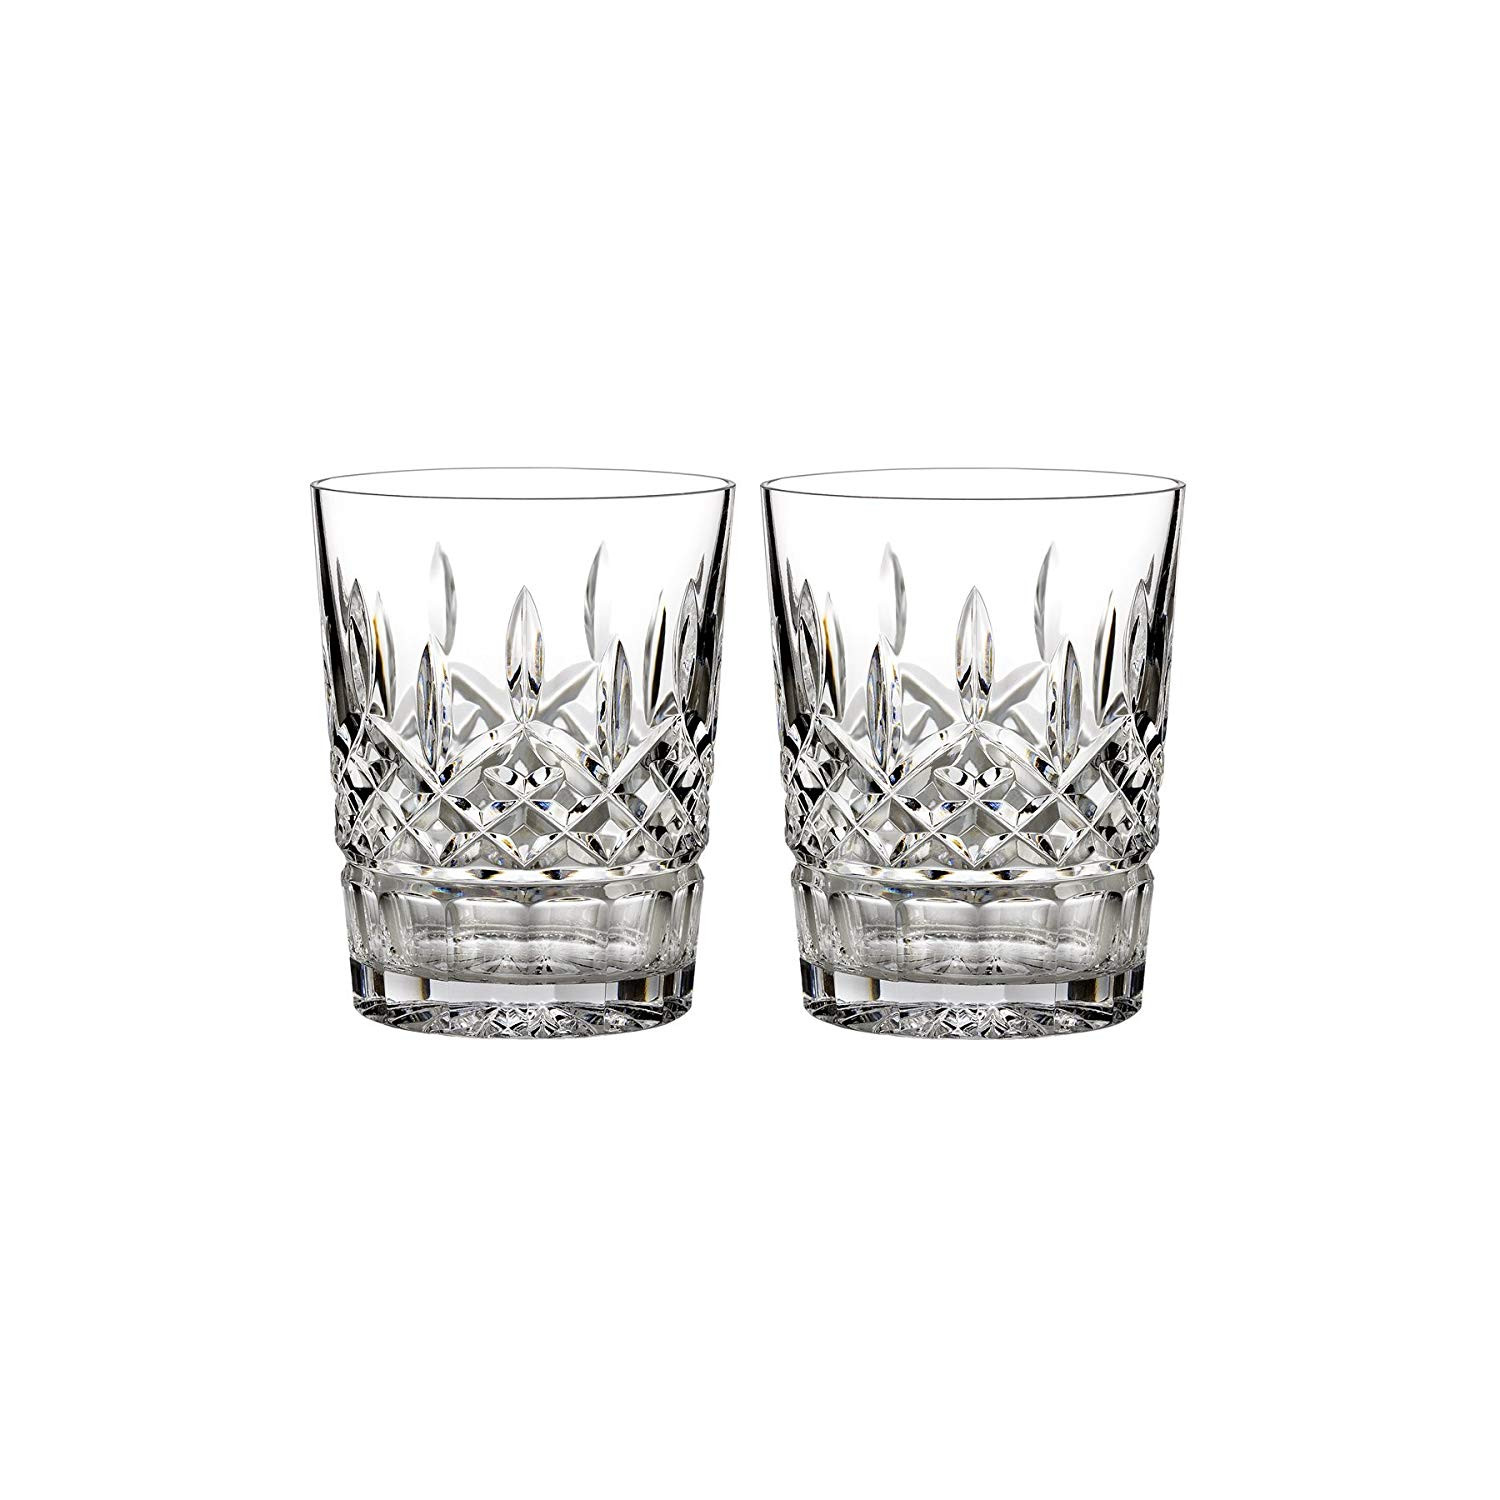 28 Unique Waterford Lismore Vase 10 Inch 2024 free download waterford lismore vase 10 inch of amazon com waterford lismore 12 oz double old fashioned set of 2 throughout amazon com waterford lismore 12 oz double old fashioned set of 2 old fashioned g